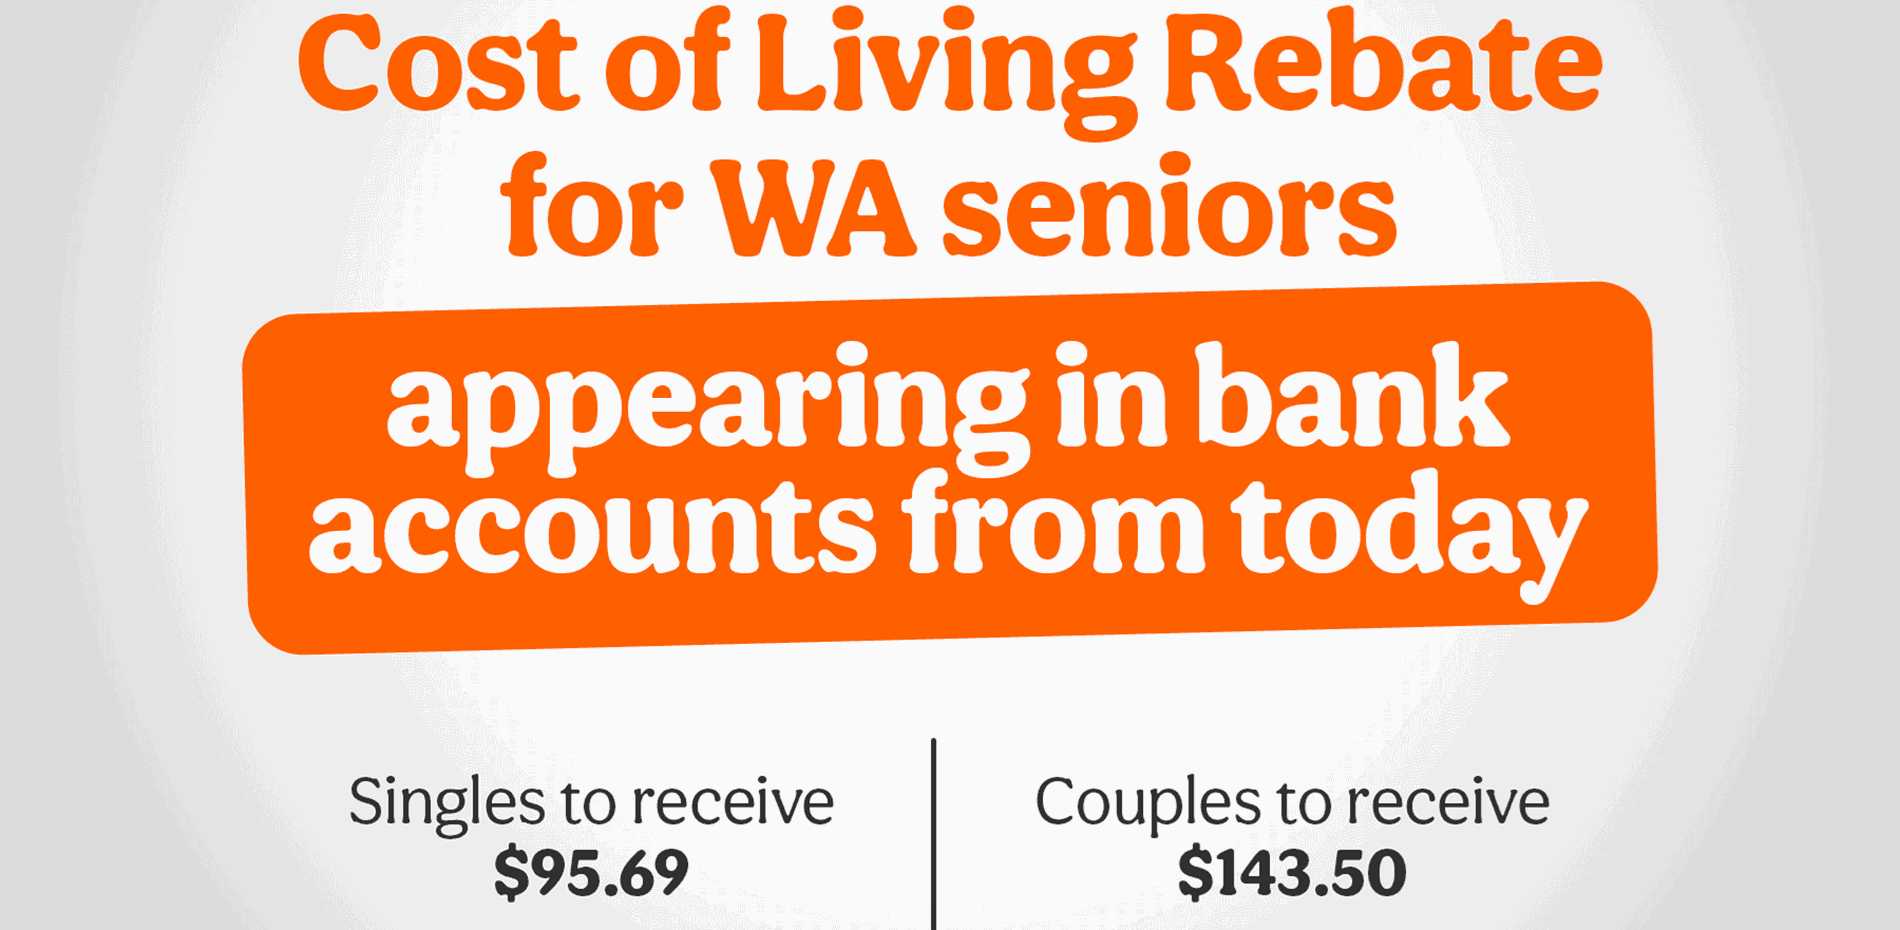 cost-of-living-rebate-to-support-wa-seniors